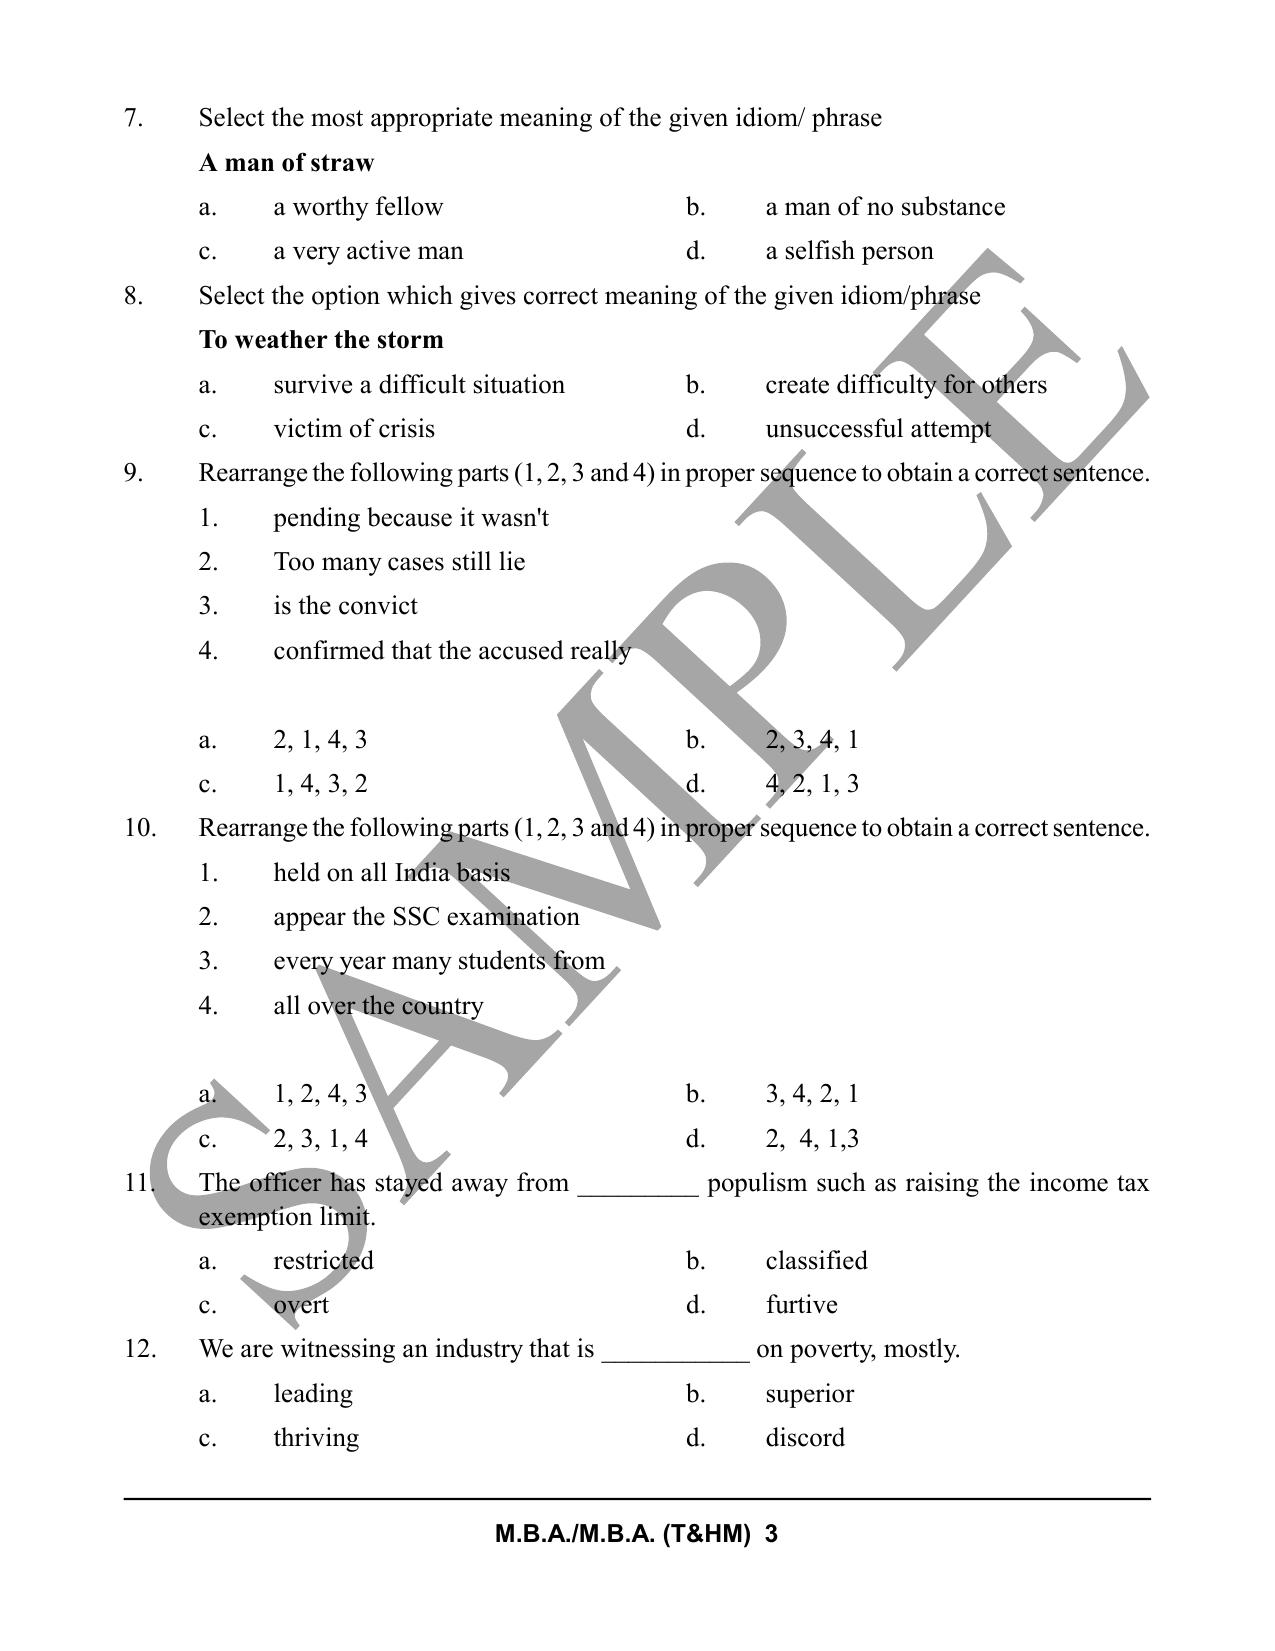 HPCET MBA and MBA (T&HM) Sample Paper 2023 Sample Paper - Page 3